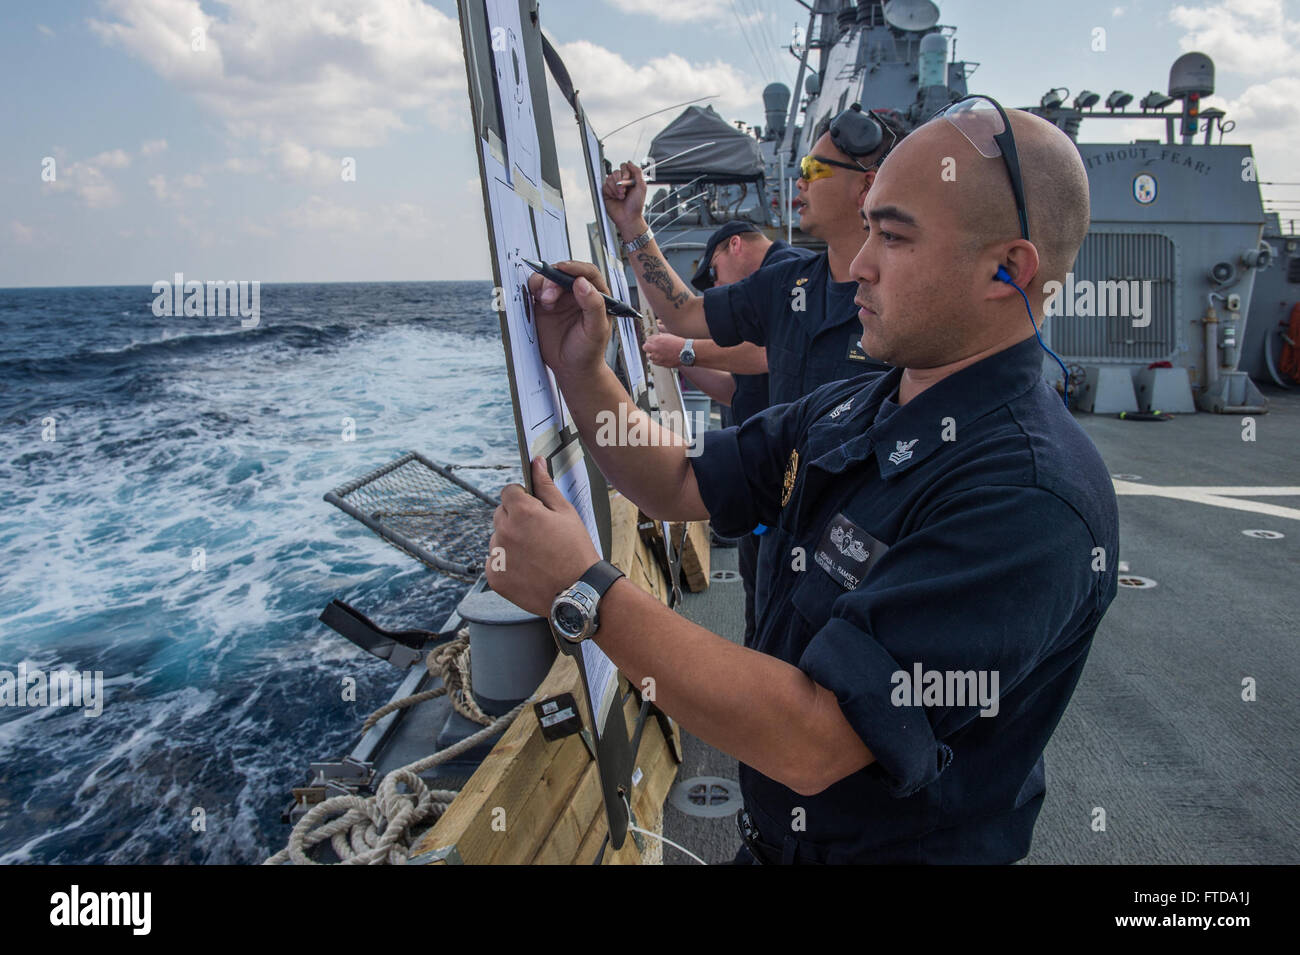 150314-N-XB010-098 MEDITERRANEAN SEA (March 14, 2015) Fire Controlman 1st Class Joshua Ramsey from Woodbridge, Virginia, front, Chief Gunner’s Mate Vuong Nguyen from Houston, back, grade targets during gun qualifications on the flight deck of USS Laboon (DDG 58) March 14, 2015. Laboon, an Arleigh Burke-class guided-missile destroyer, homeported in Norfolk, is conducting naval operations in the U.S. 6th Fleet area of operations in support of U.S. national security interests in Europe. (U.S. Navy photo by Mass Communication Specialist 3rd Class Desmond Parks/Released) Stock Photo